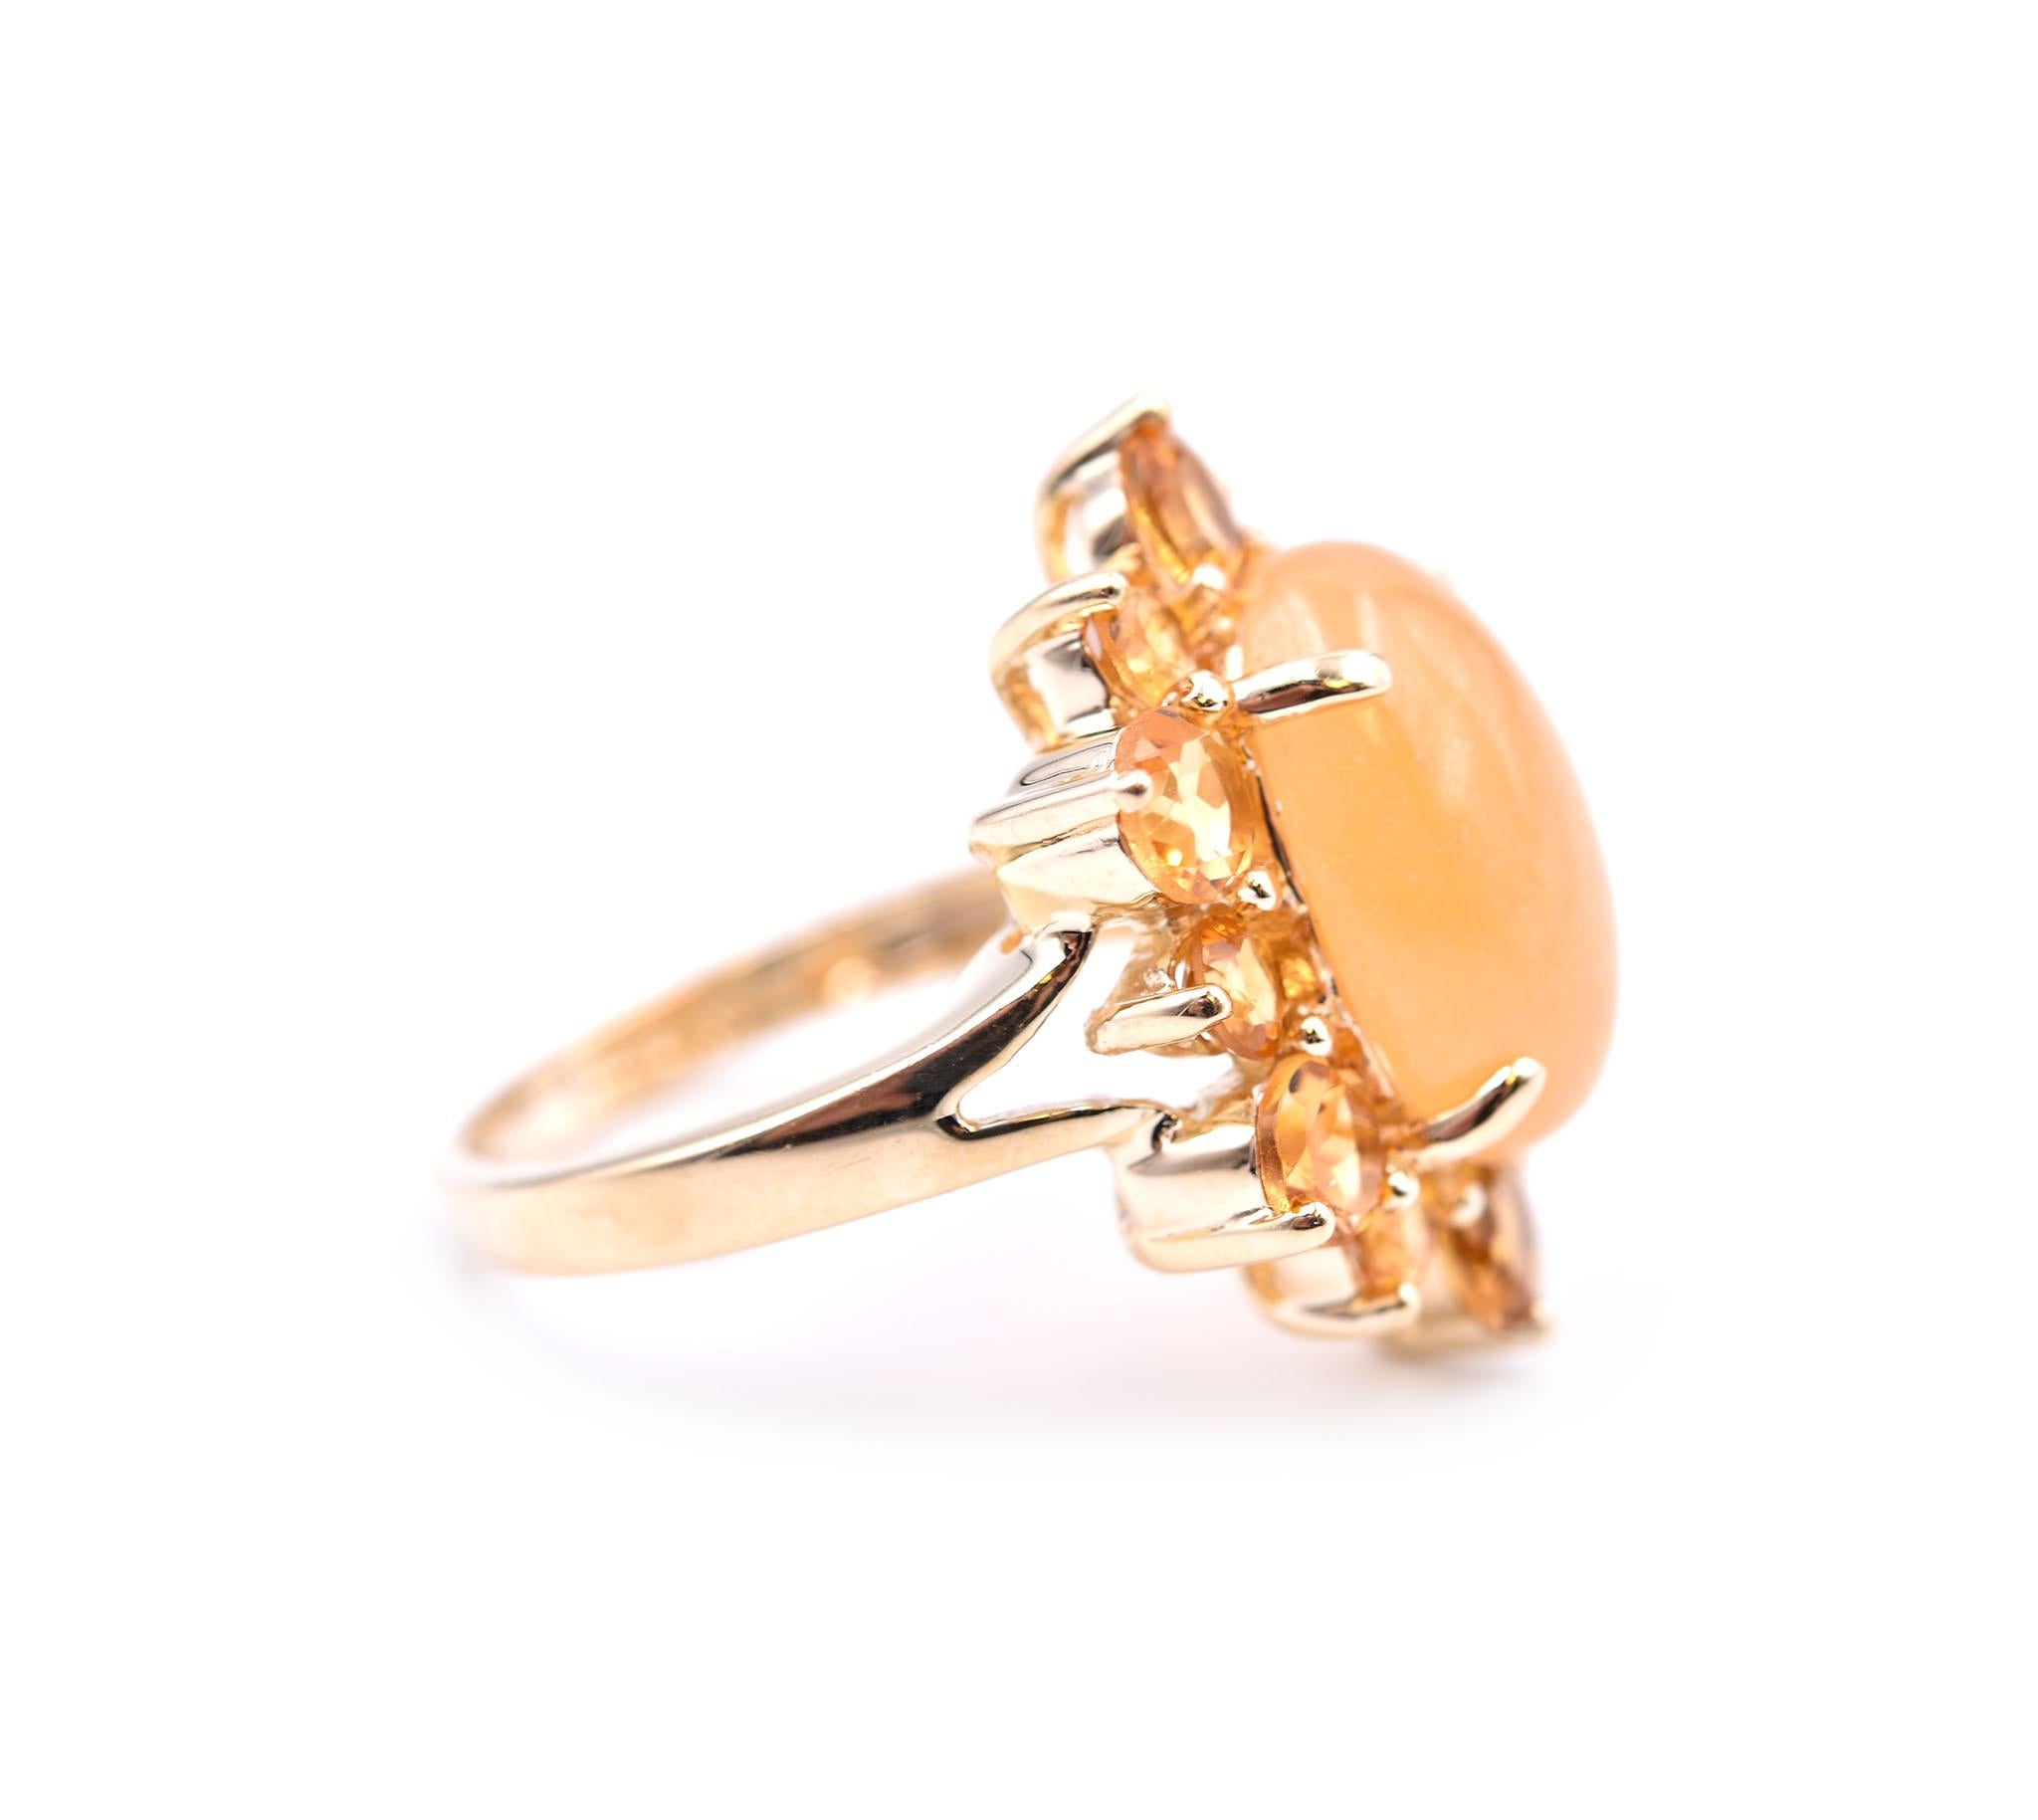 Designer: custom design
Material: 14k yellow gold
Gemstones: 1 cabochon yellow jade = 5.21ct
12 round citrines = 1.00cttw
Ring Size: 6 (please allow two additional shipping days for sizing requests)
Dimensions: ring top measures 22.35mm by